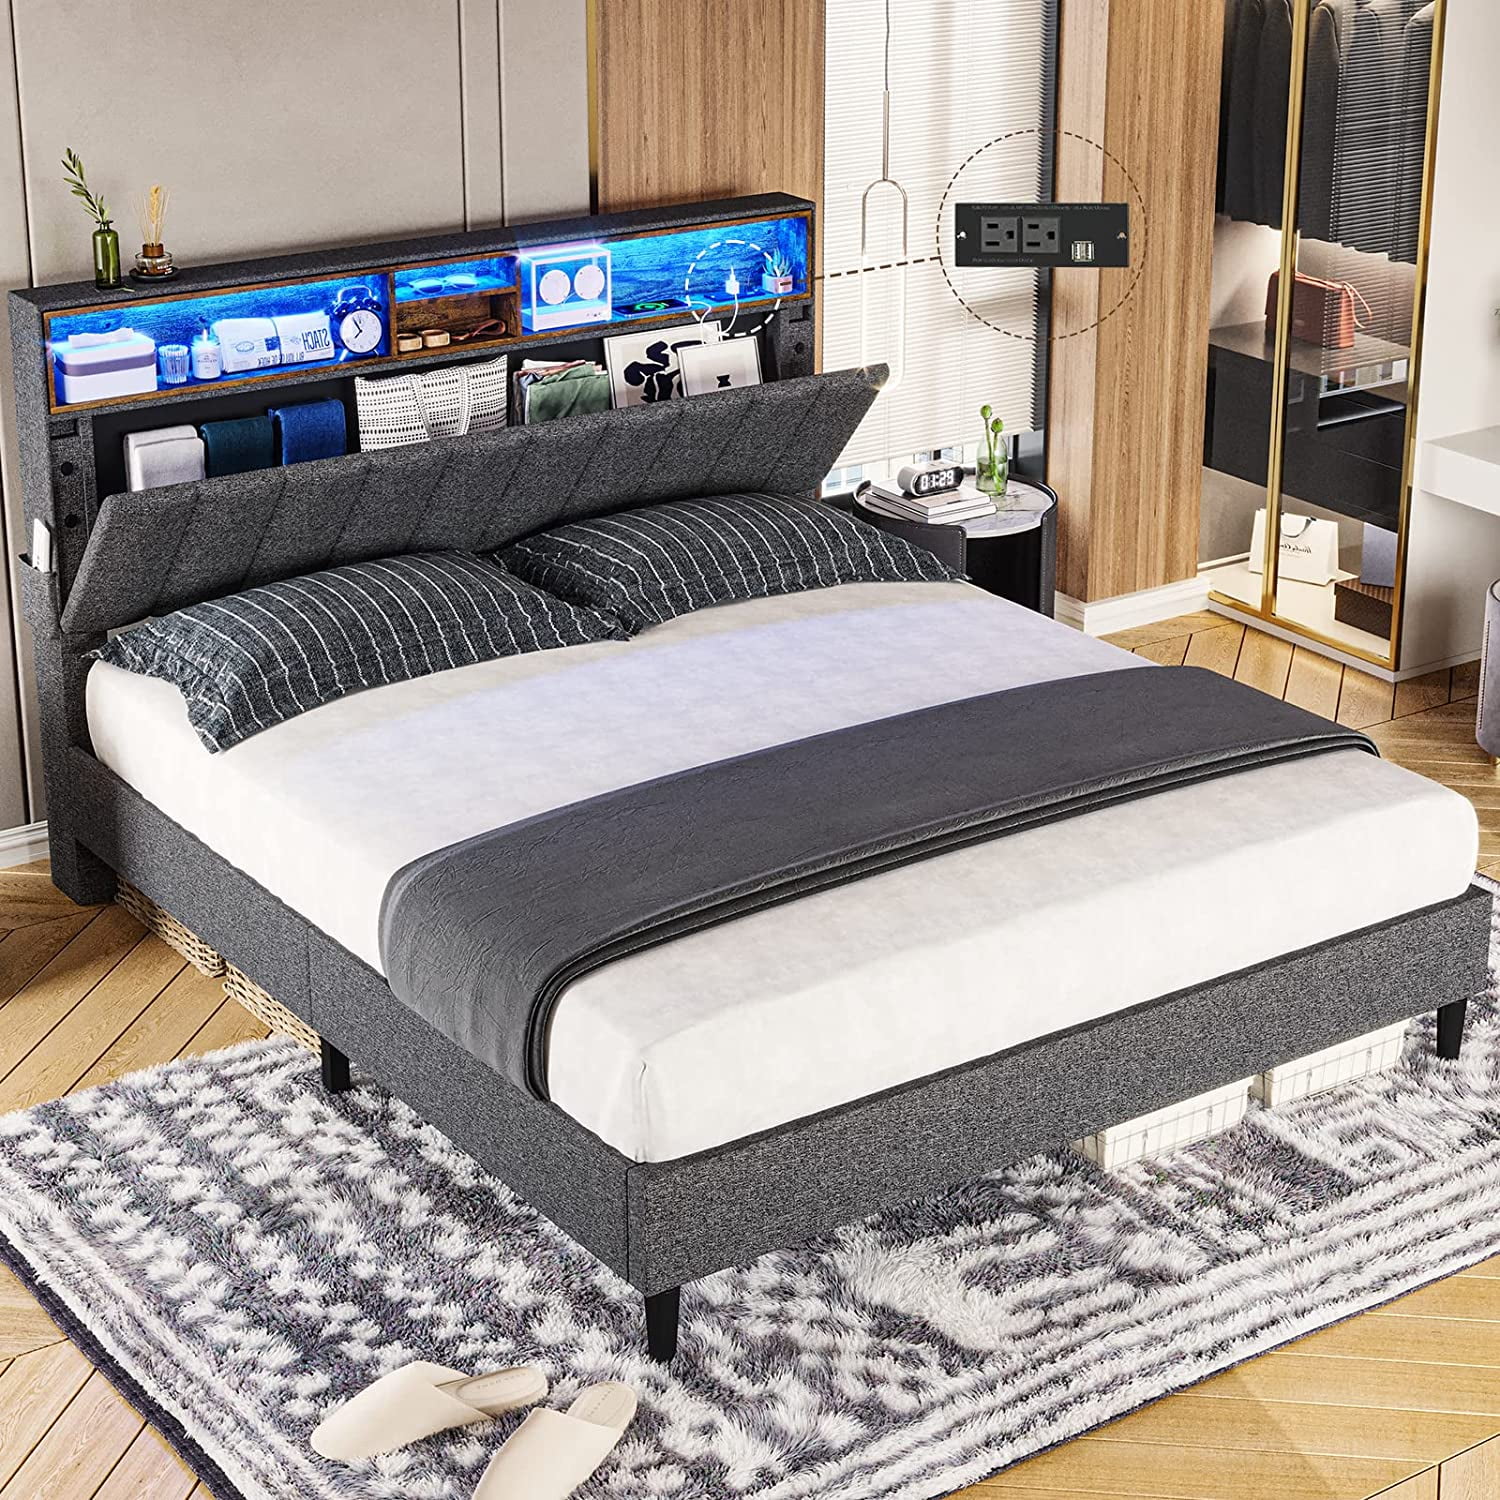 Booth Wirwar totaal ADORNEVE Full Size LED Bed Frame with Outlet and USB Ports, Platform Bed  Frame with Storage Headboard, No Box Spring Needed, Dark Grey - Walmart.com